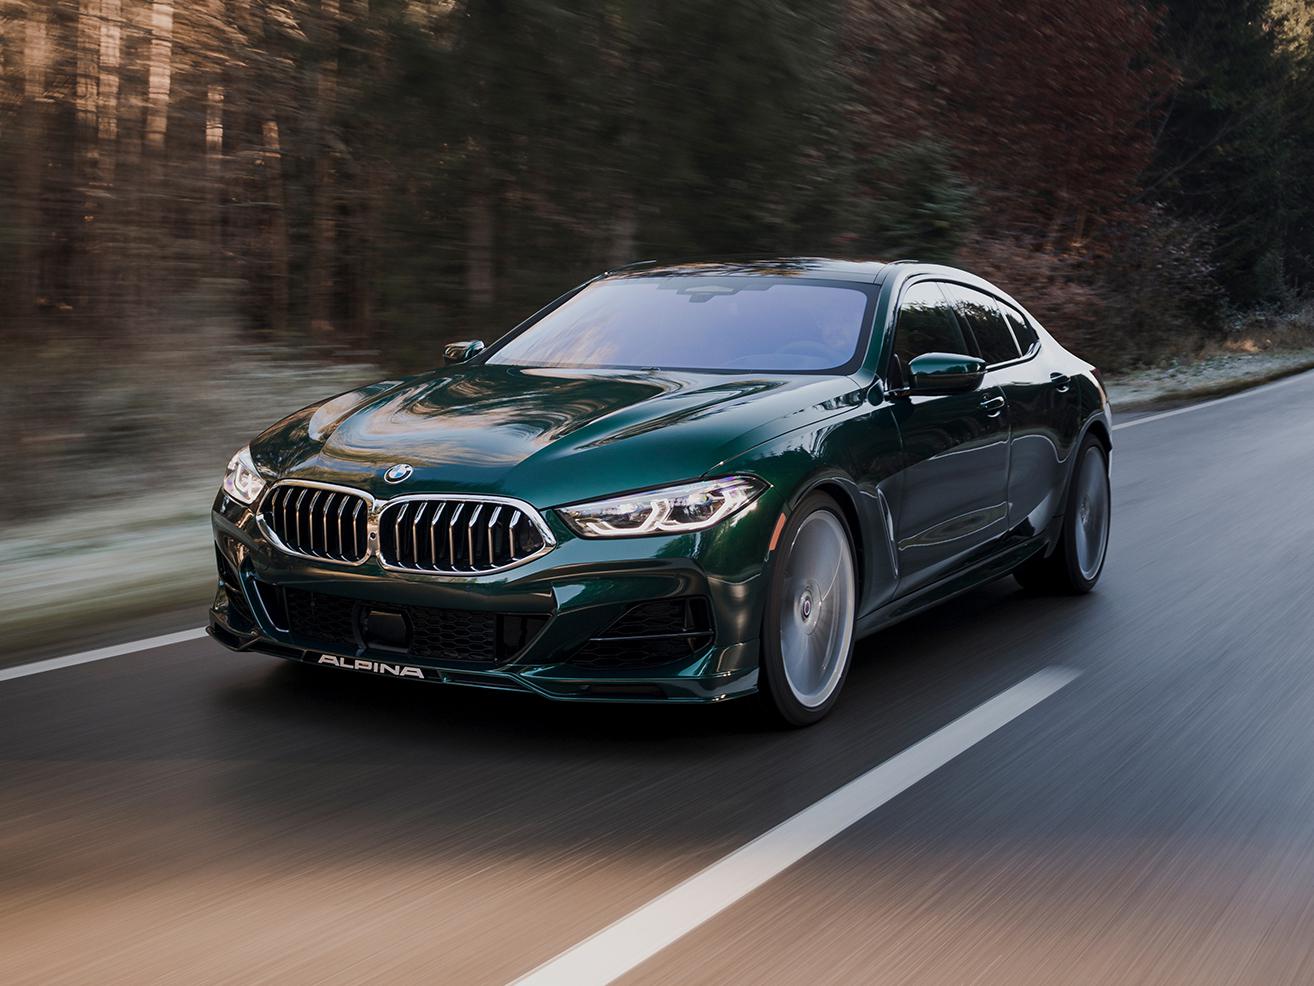 The 2022 BMW Alpina B8 Gran Coupé is a grand take on tuned luxury.